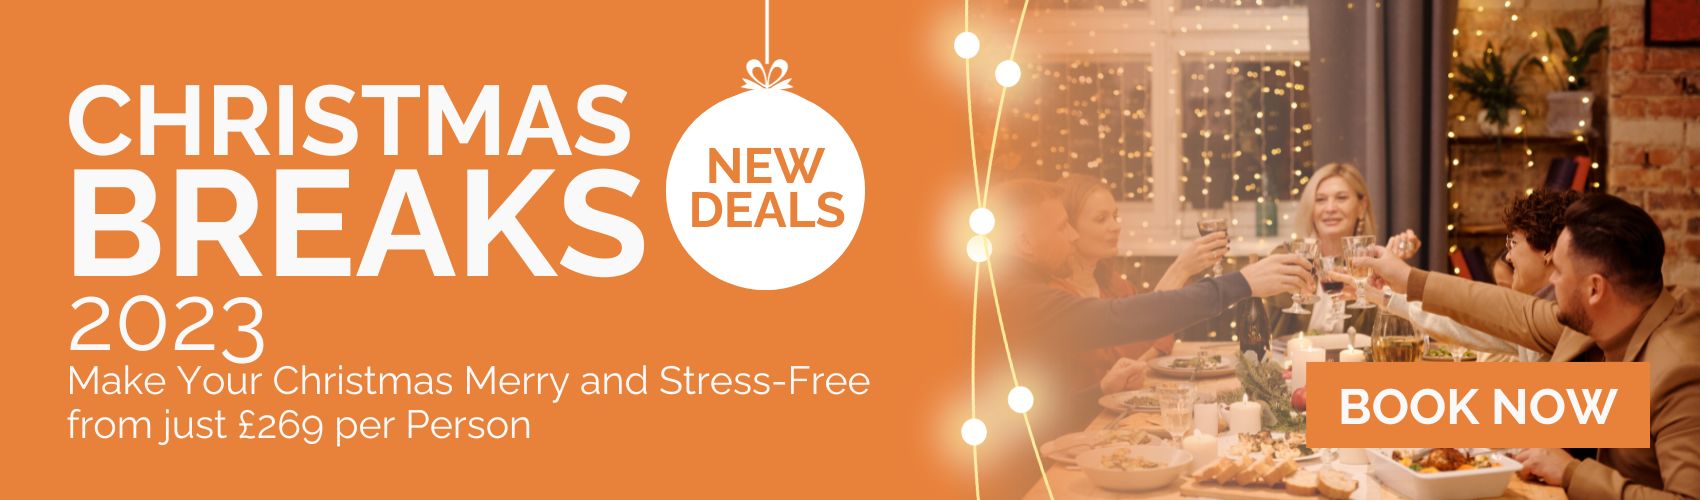 greatlittlebreaks christmas breaks make your christmas merry and stress-free from just £269 per person. click here to book now.